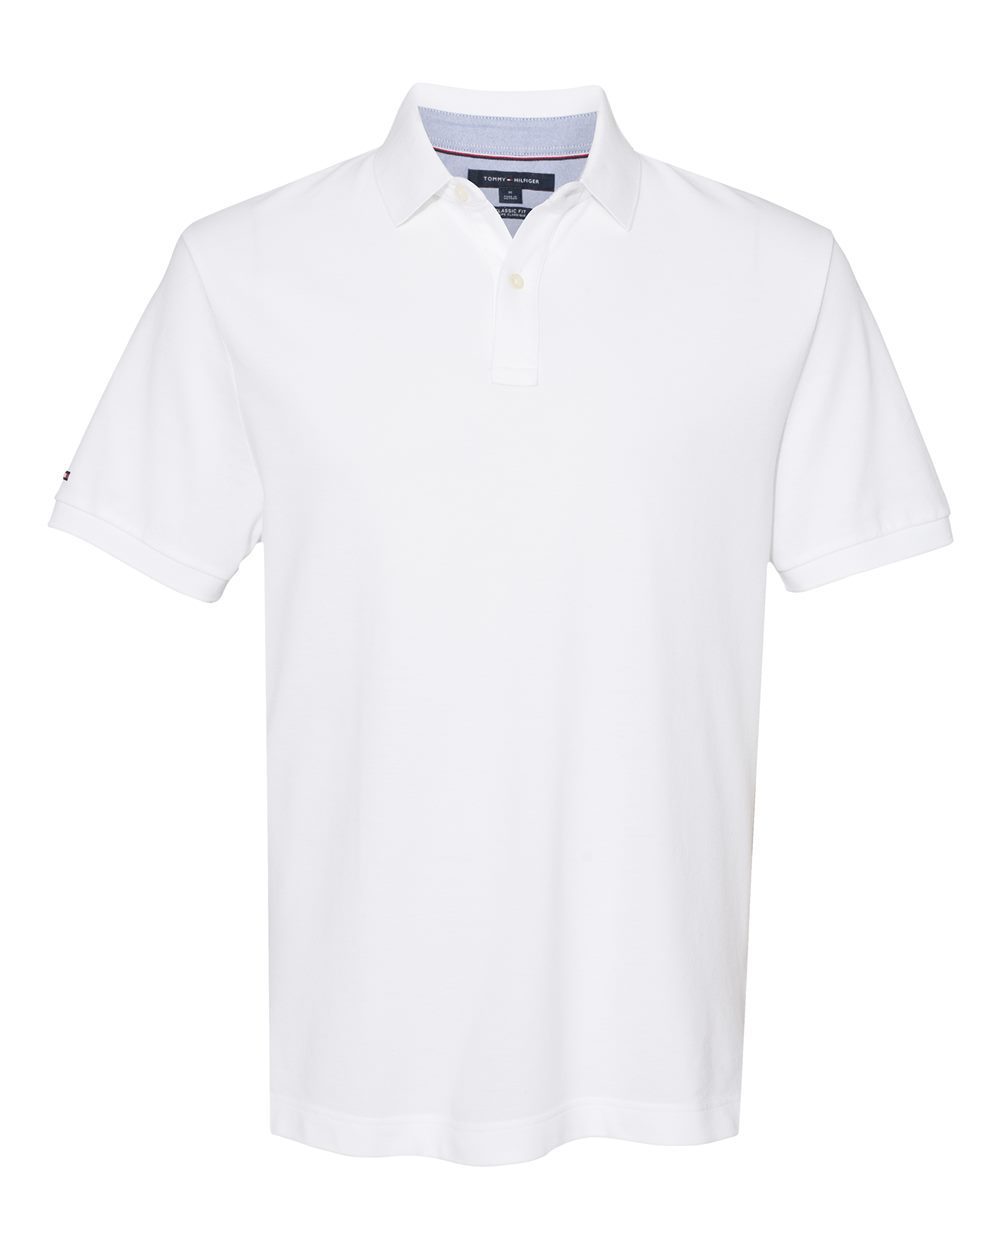 Tommy Hilfiger Classic Fit Ivy Pique Polo #13H1867 White